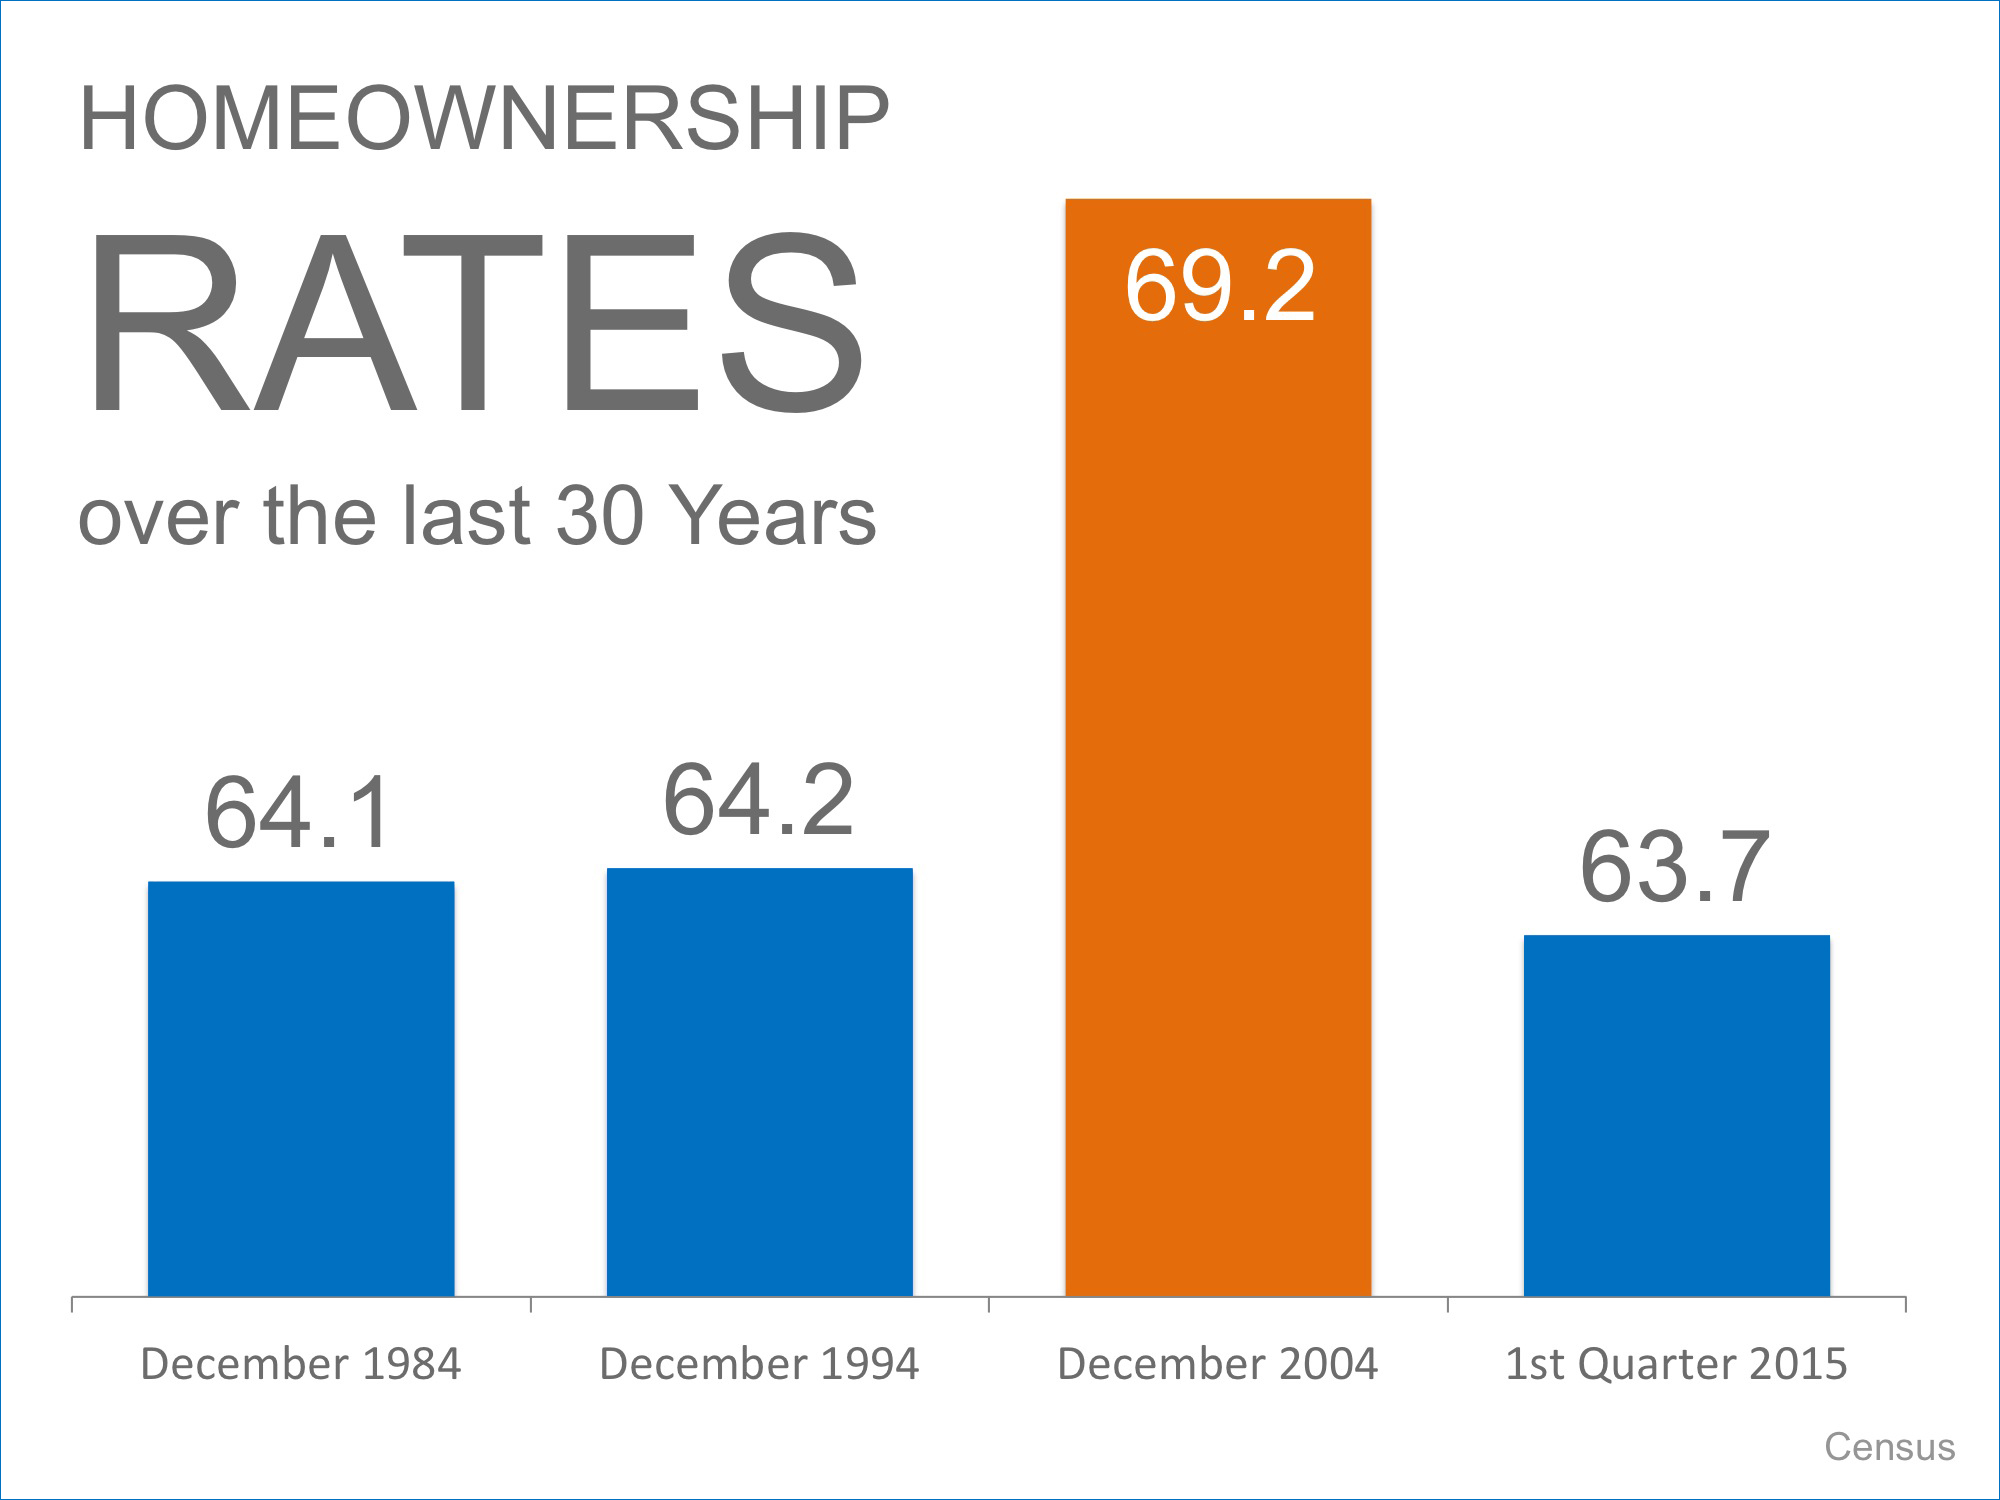 Easy Chicken Little: Homeownership Rates Are NOT Crashing | Simplifying The Market